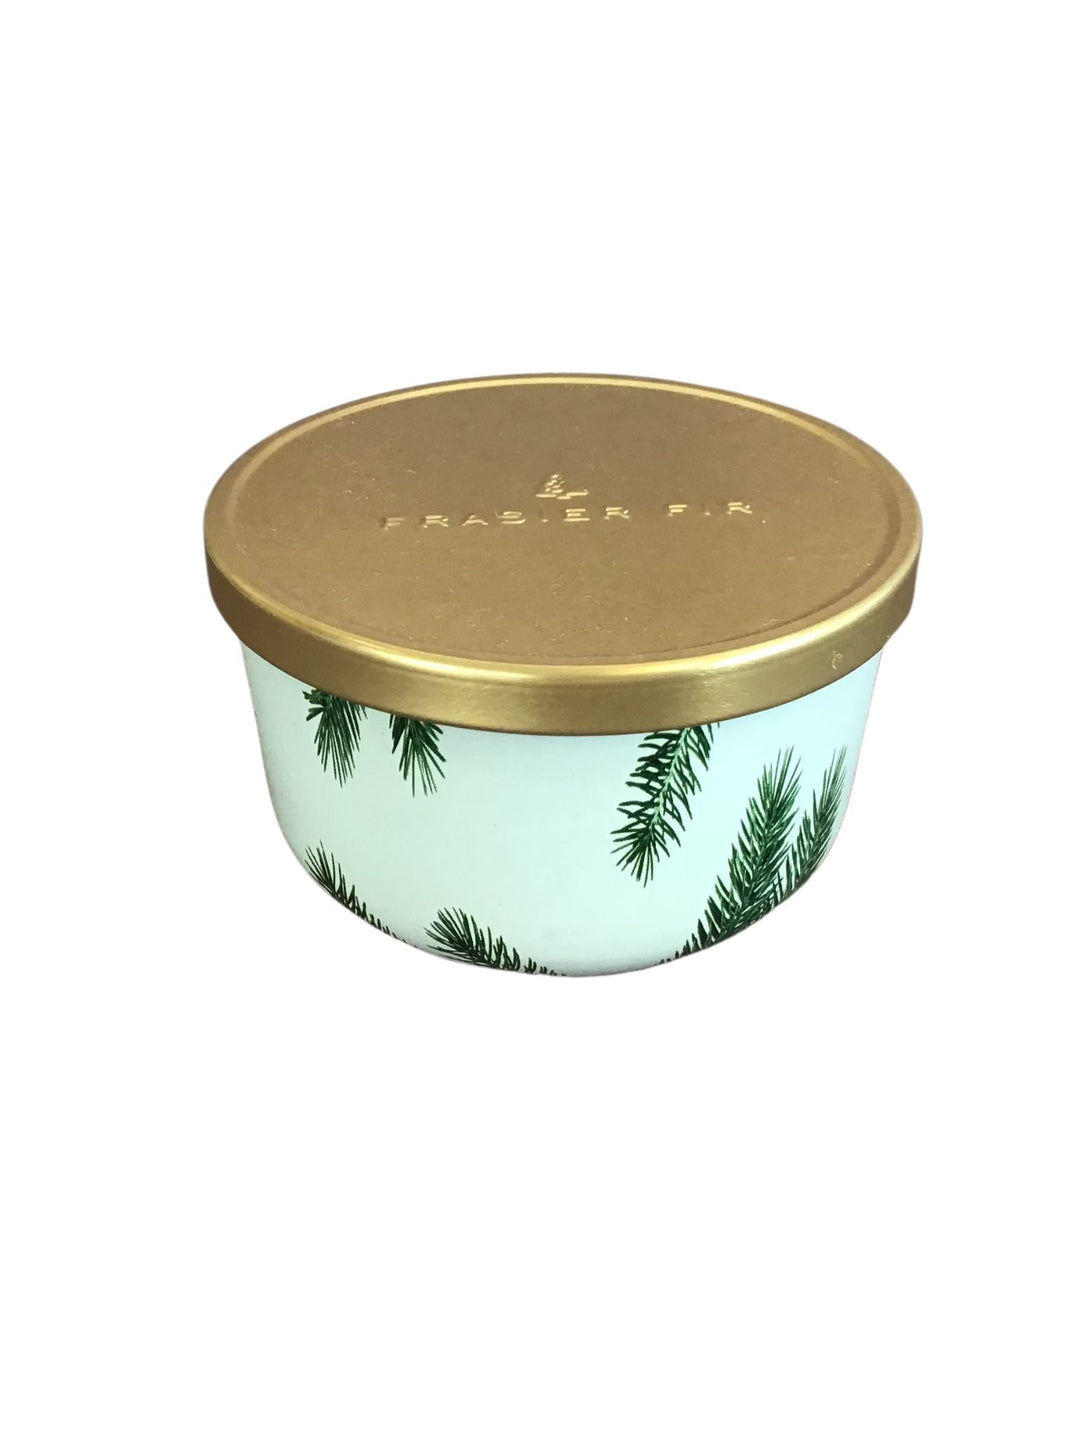 Thymes-Thymes Frasier Fir Poured Candle Tin - Leela and Lavender